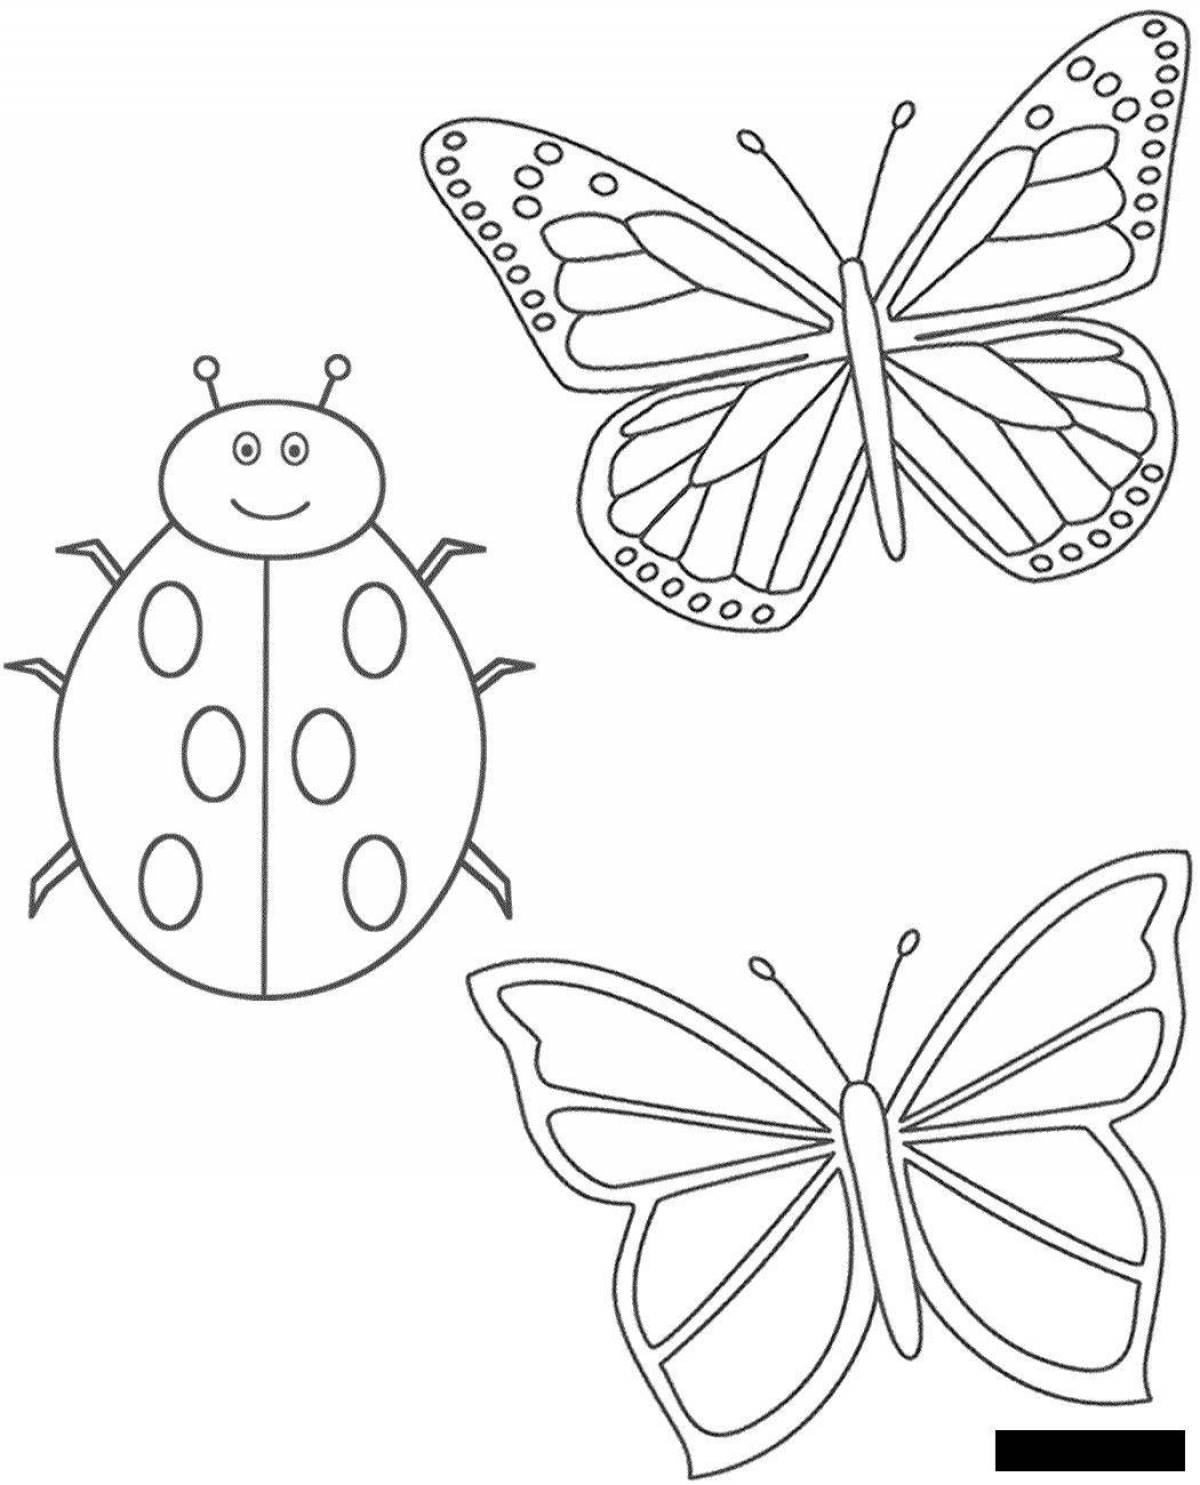 Awesome coloring page make a coloring book